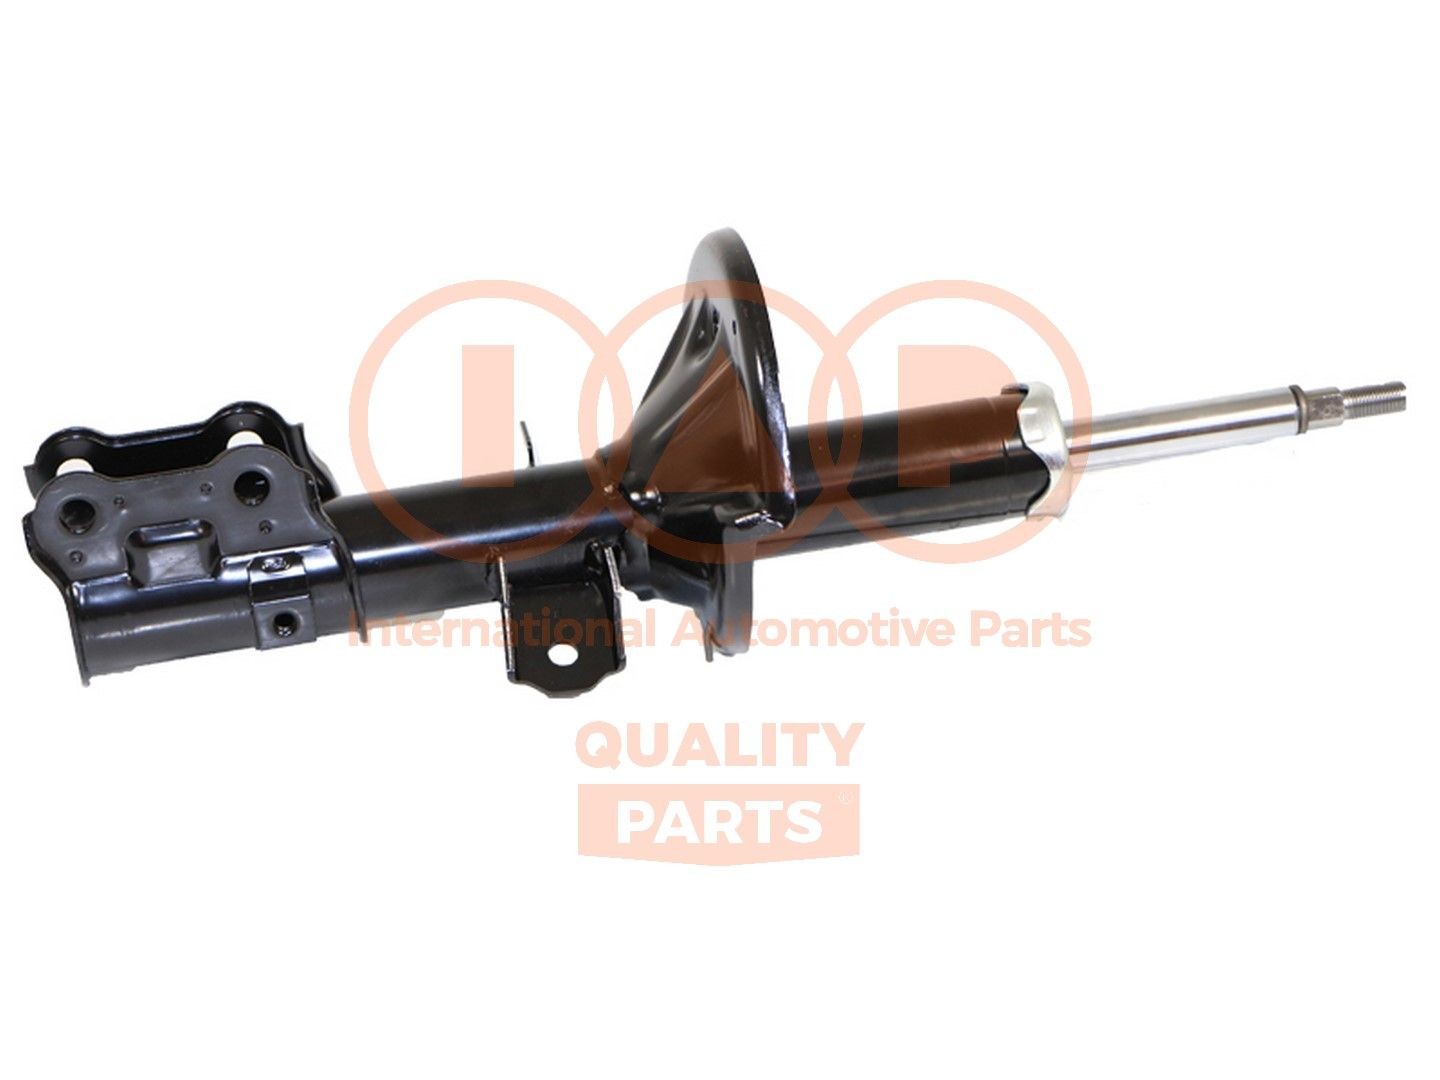 IAP QUALITY PARTS 504-07144 Shock absorber 546601C200